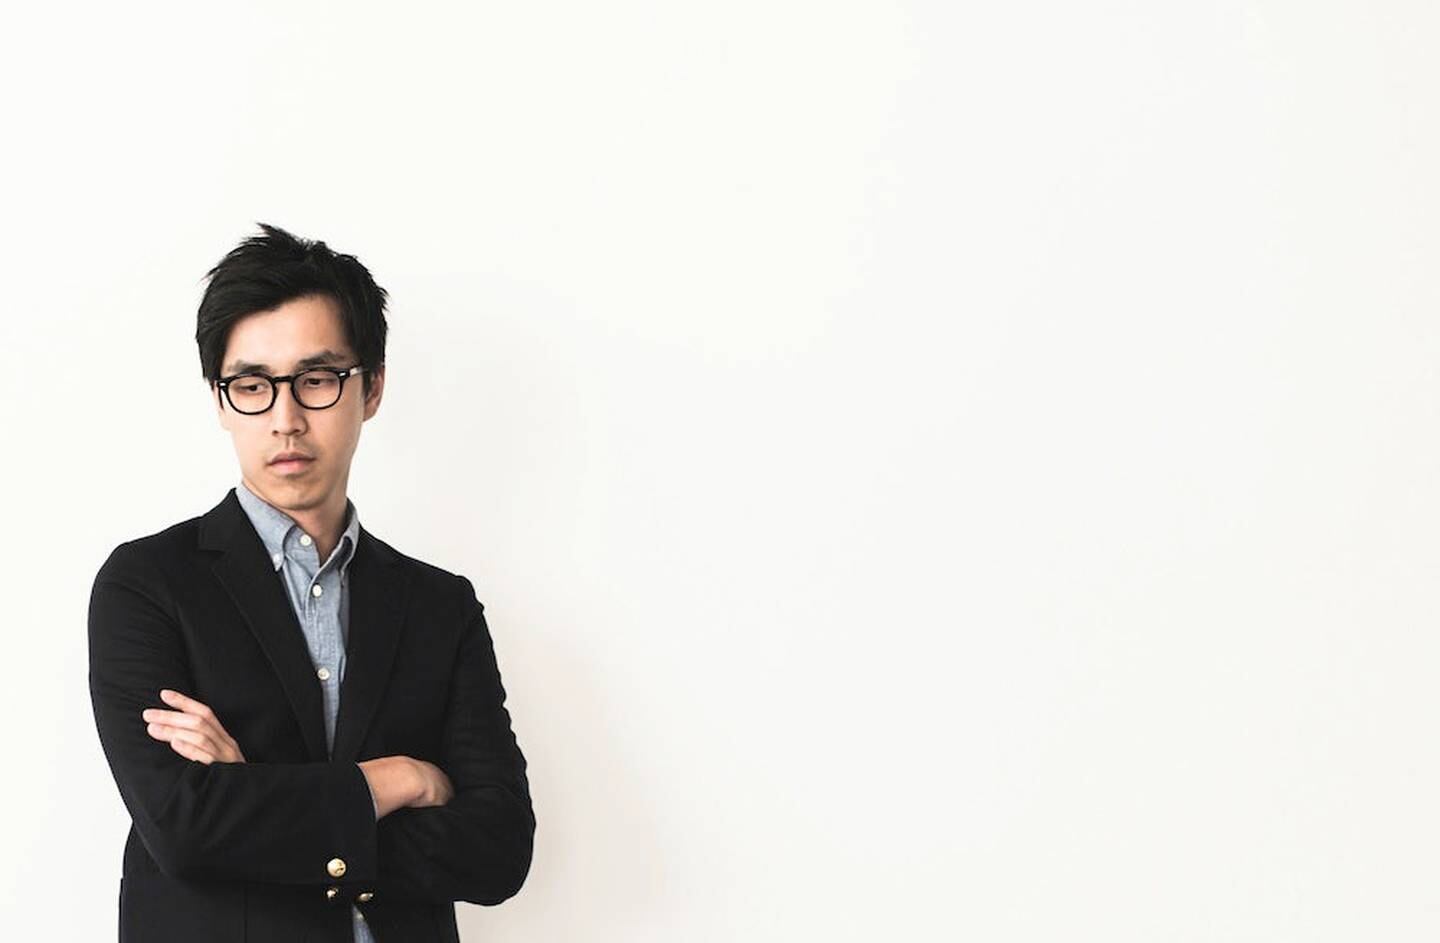 Kevin Ma, founder of Hypebeast